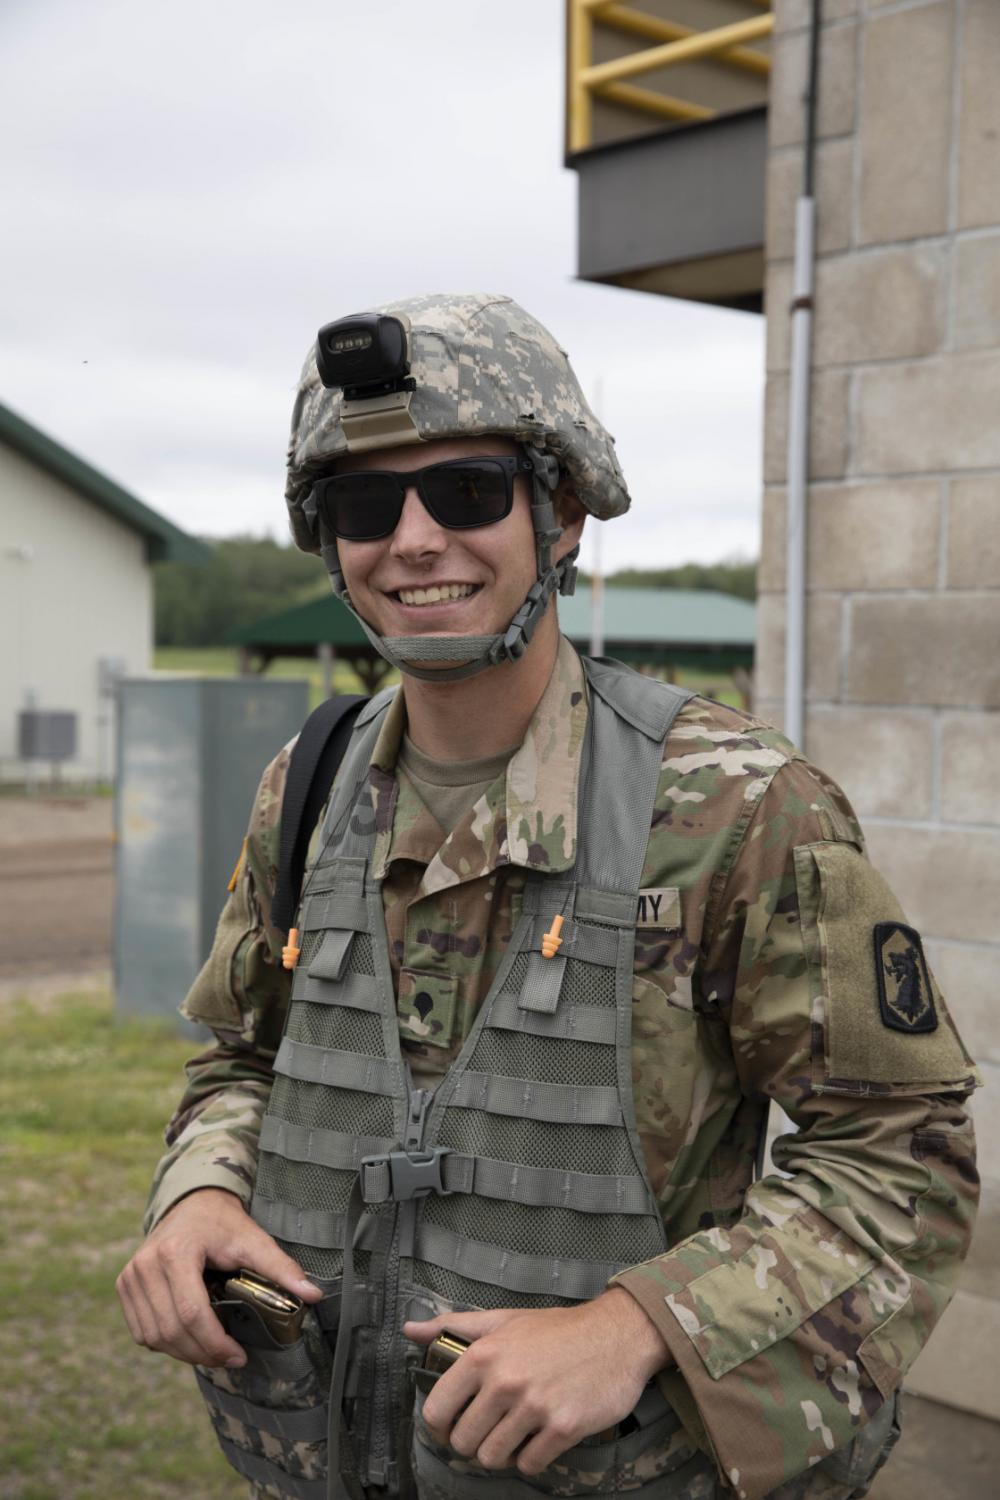 Illinois Army National Guard Soldiers Qualify on M4/M4A1 Range at Camp Ripley